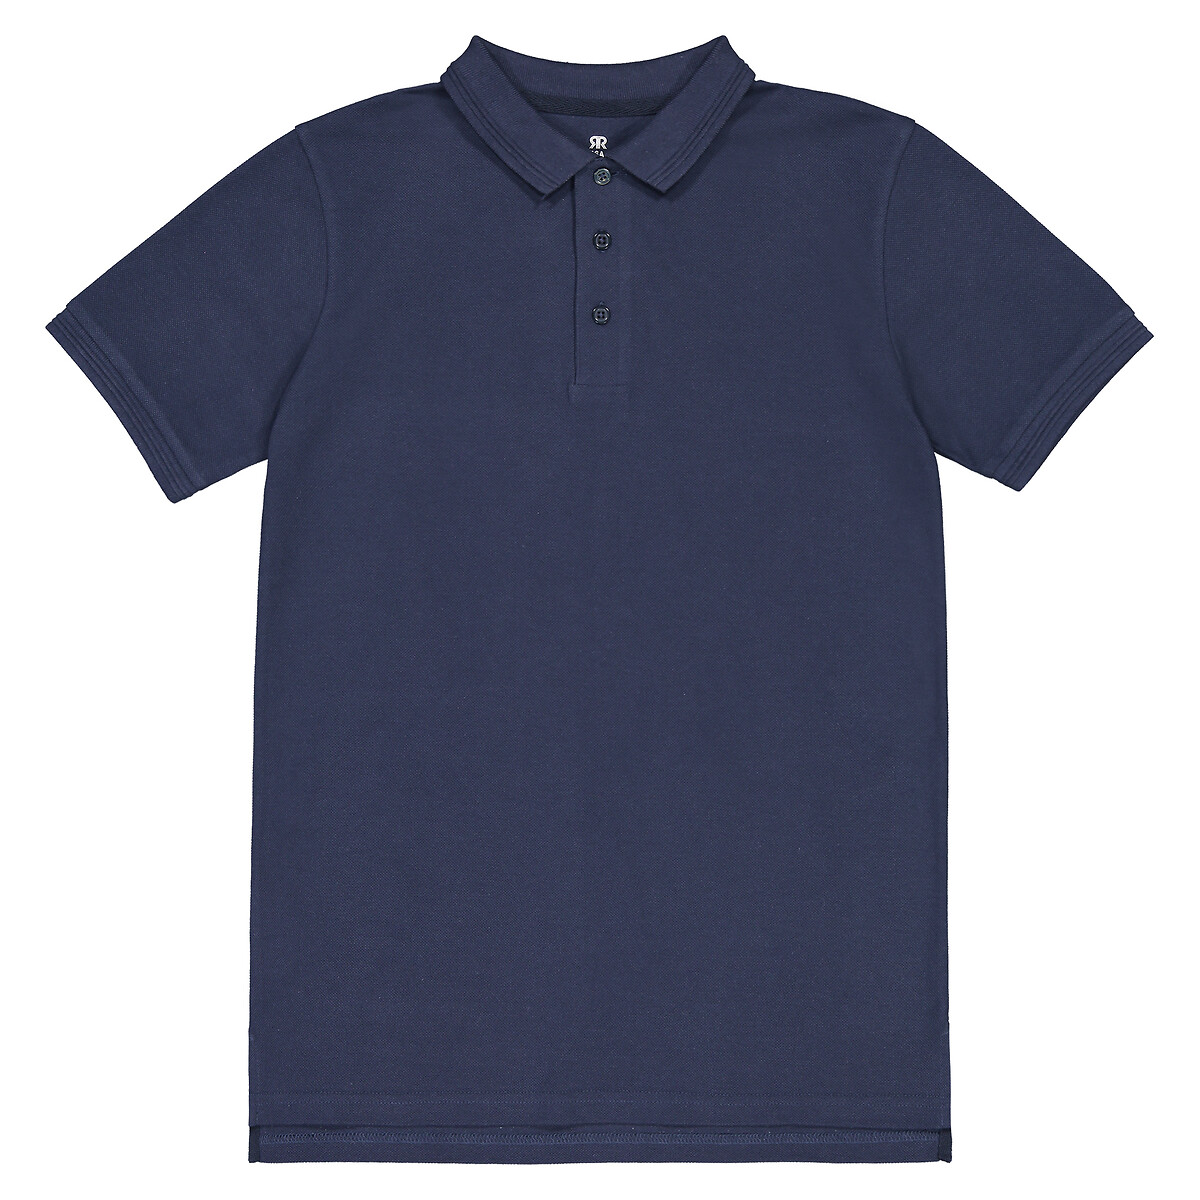 Cotton pique polo shirt with short sleeves La Redoute Collections | La ...